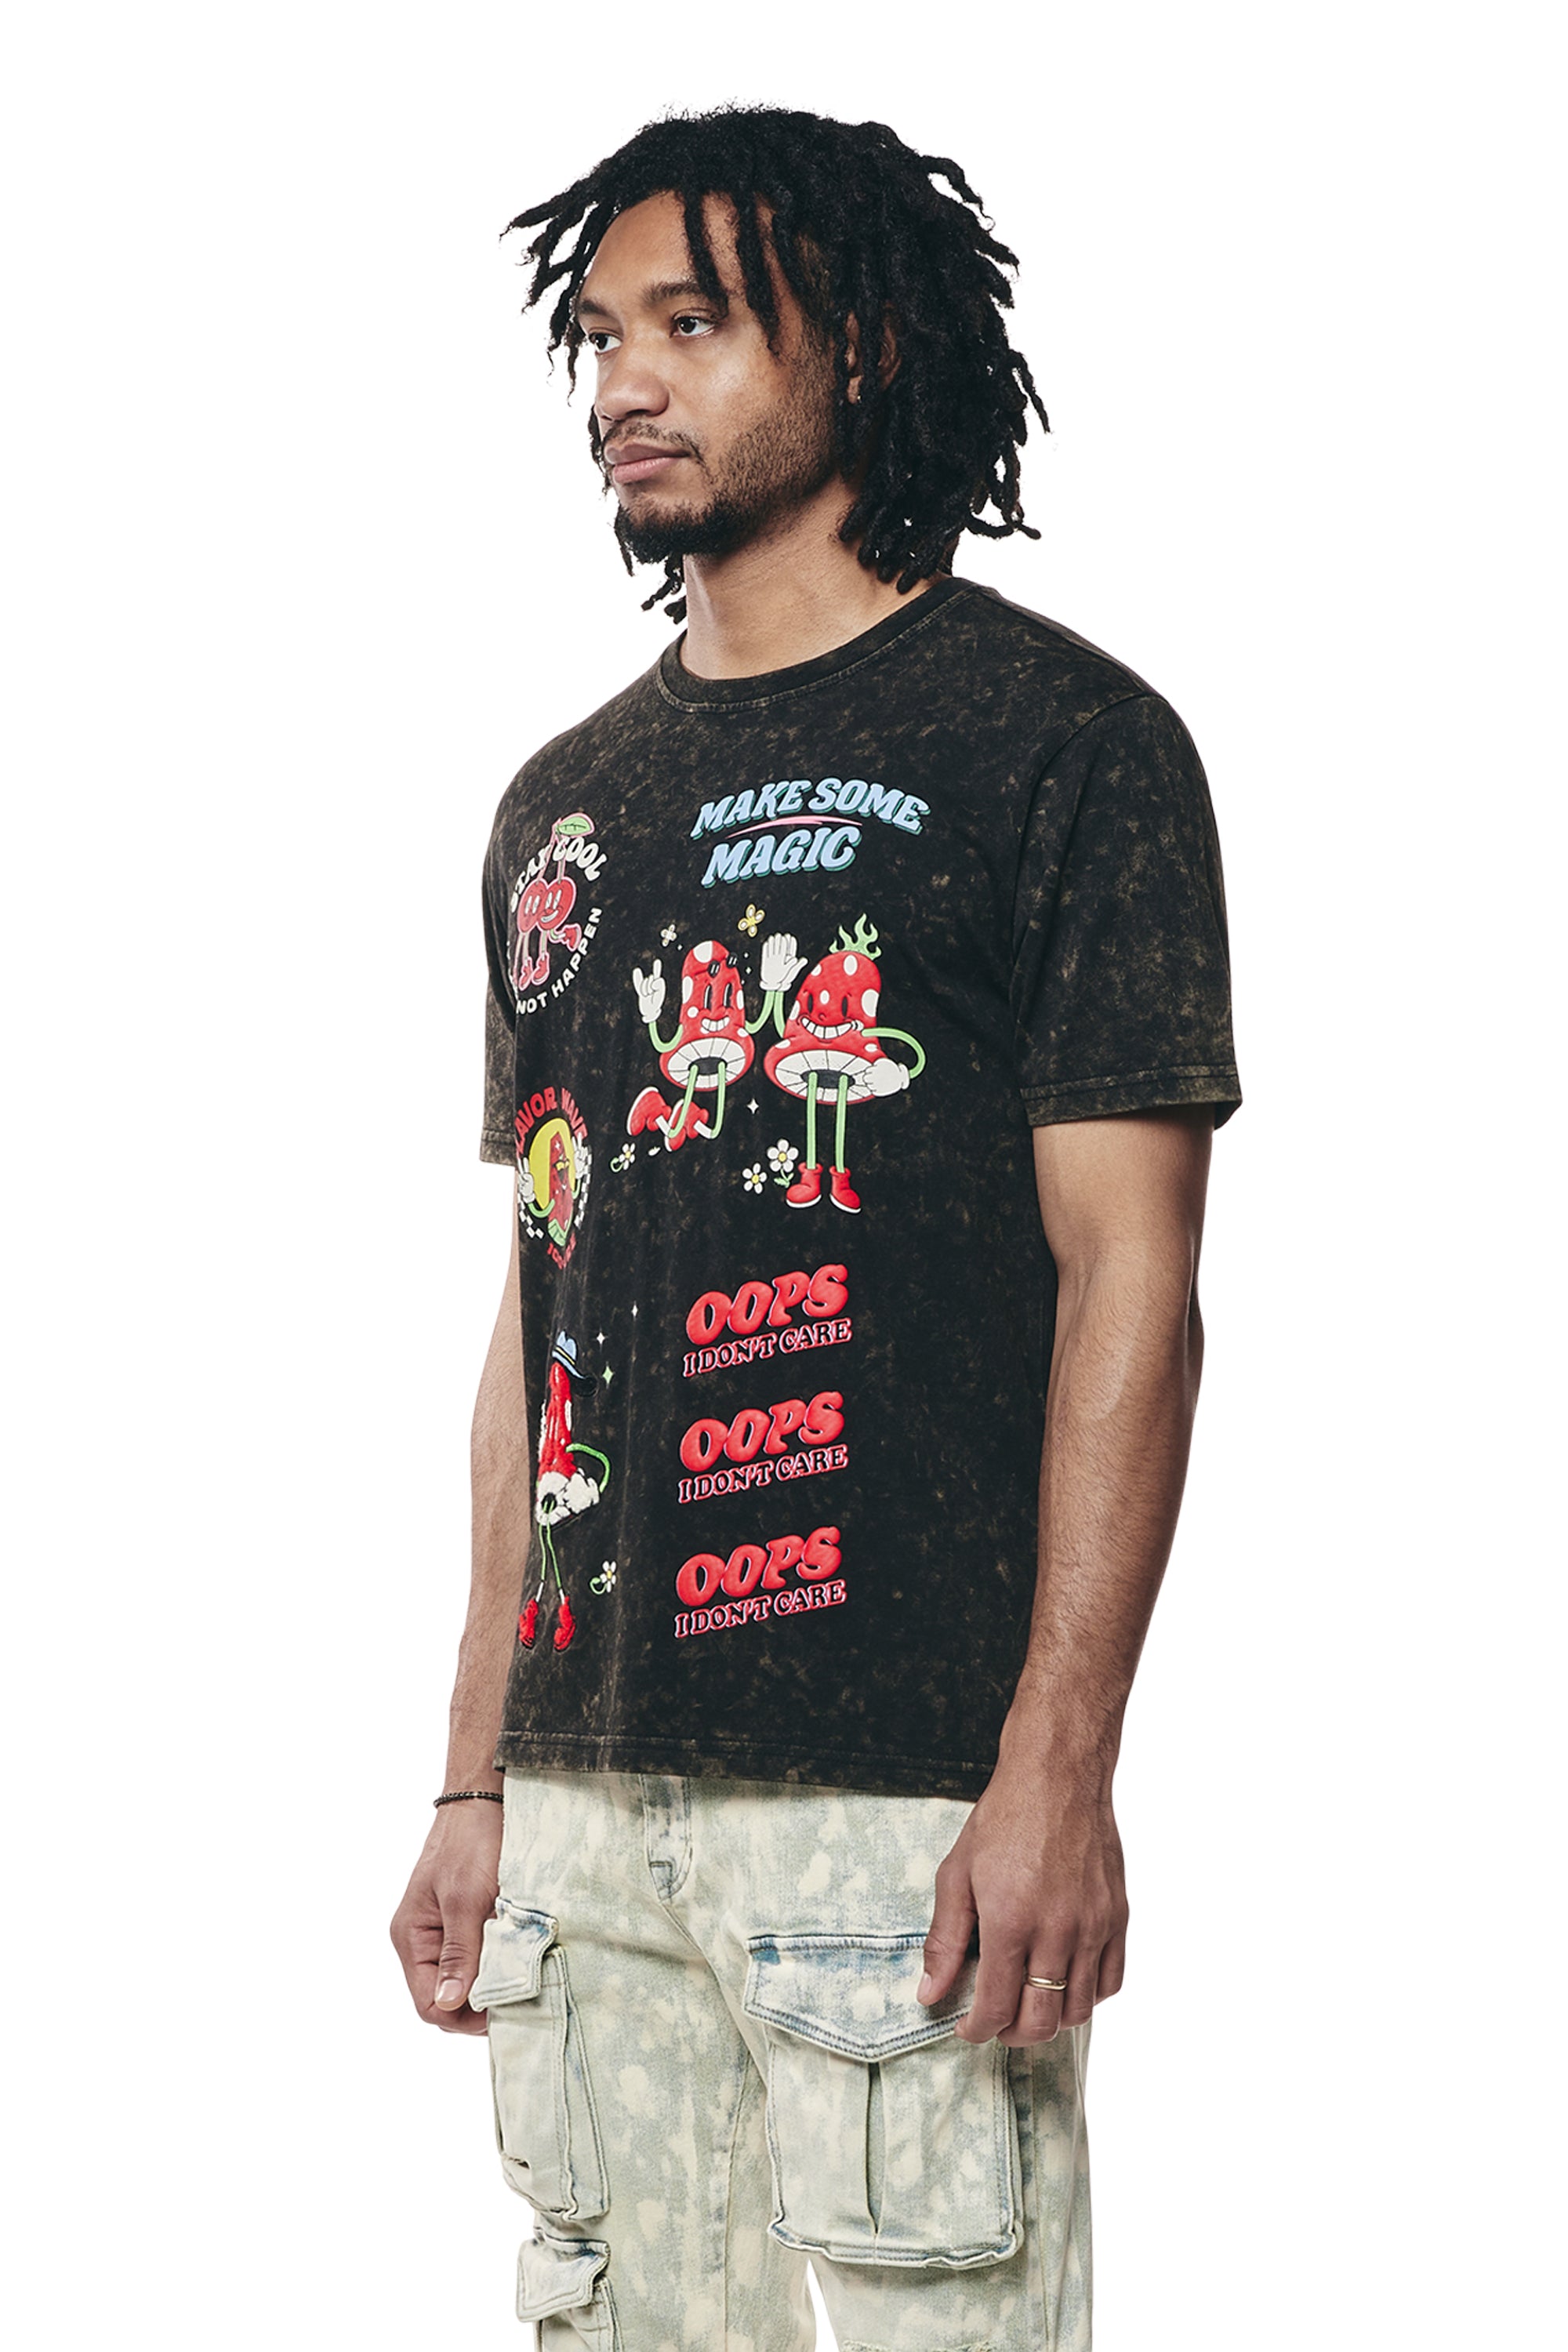 Embroidered Patched & Graphic Printed T Shirt - Black